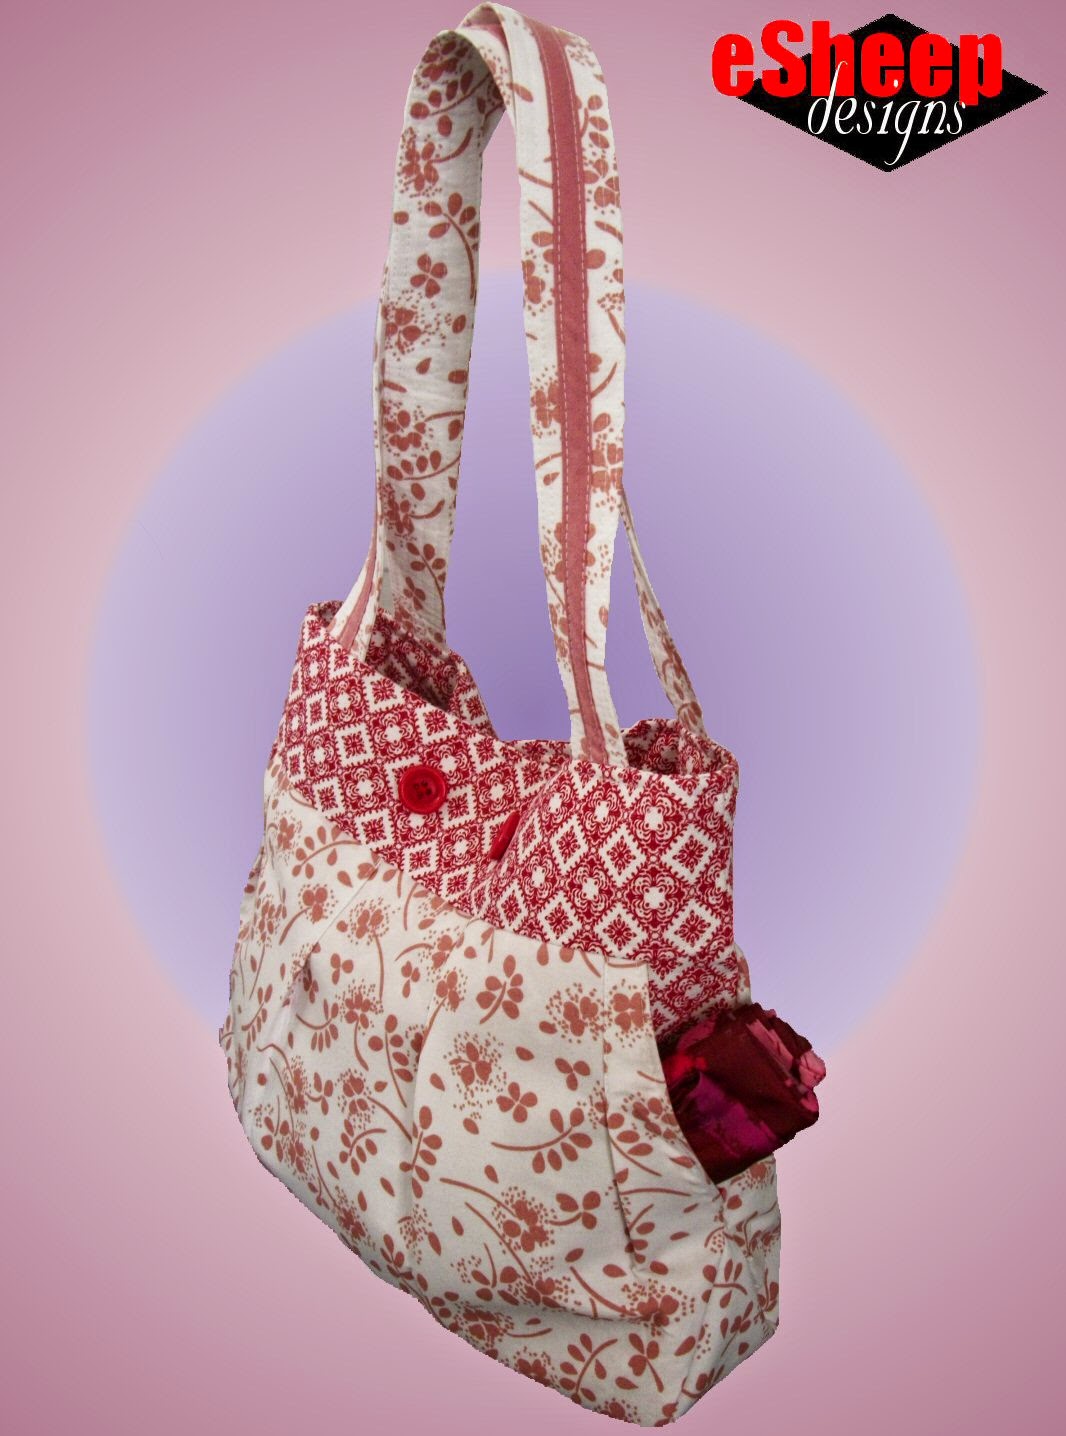 Make it Yours Bag by eSheep Designs